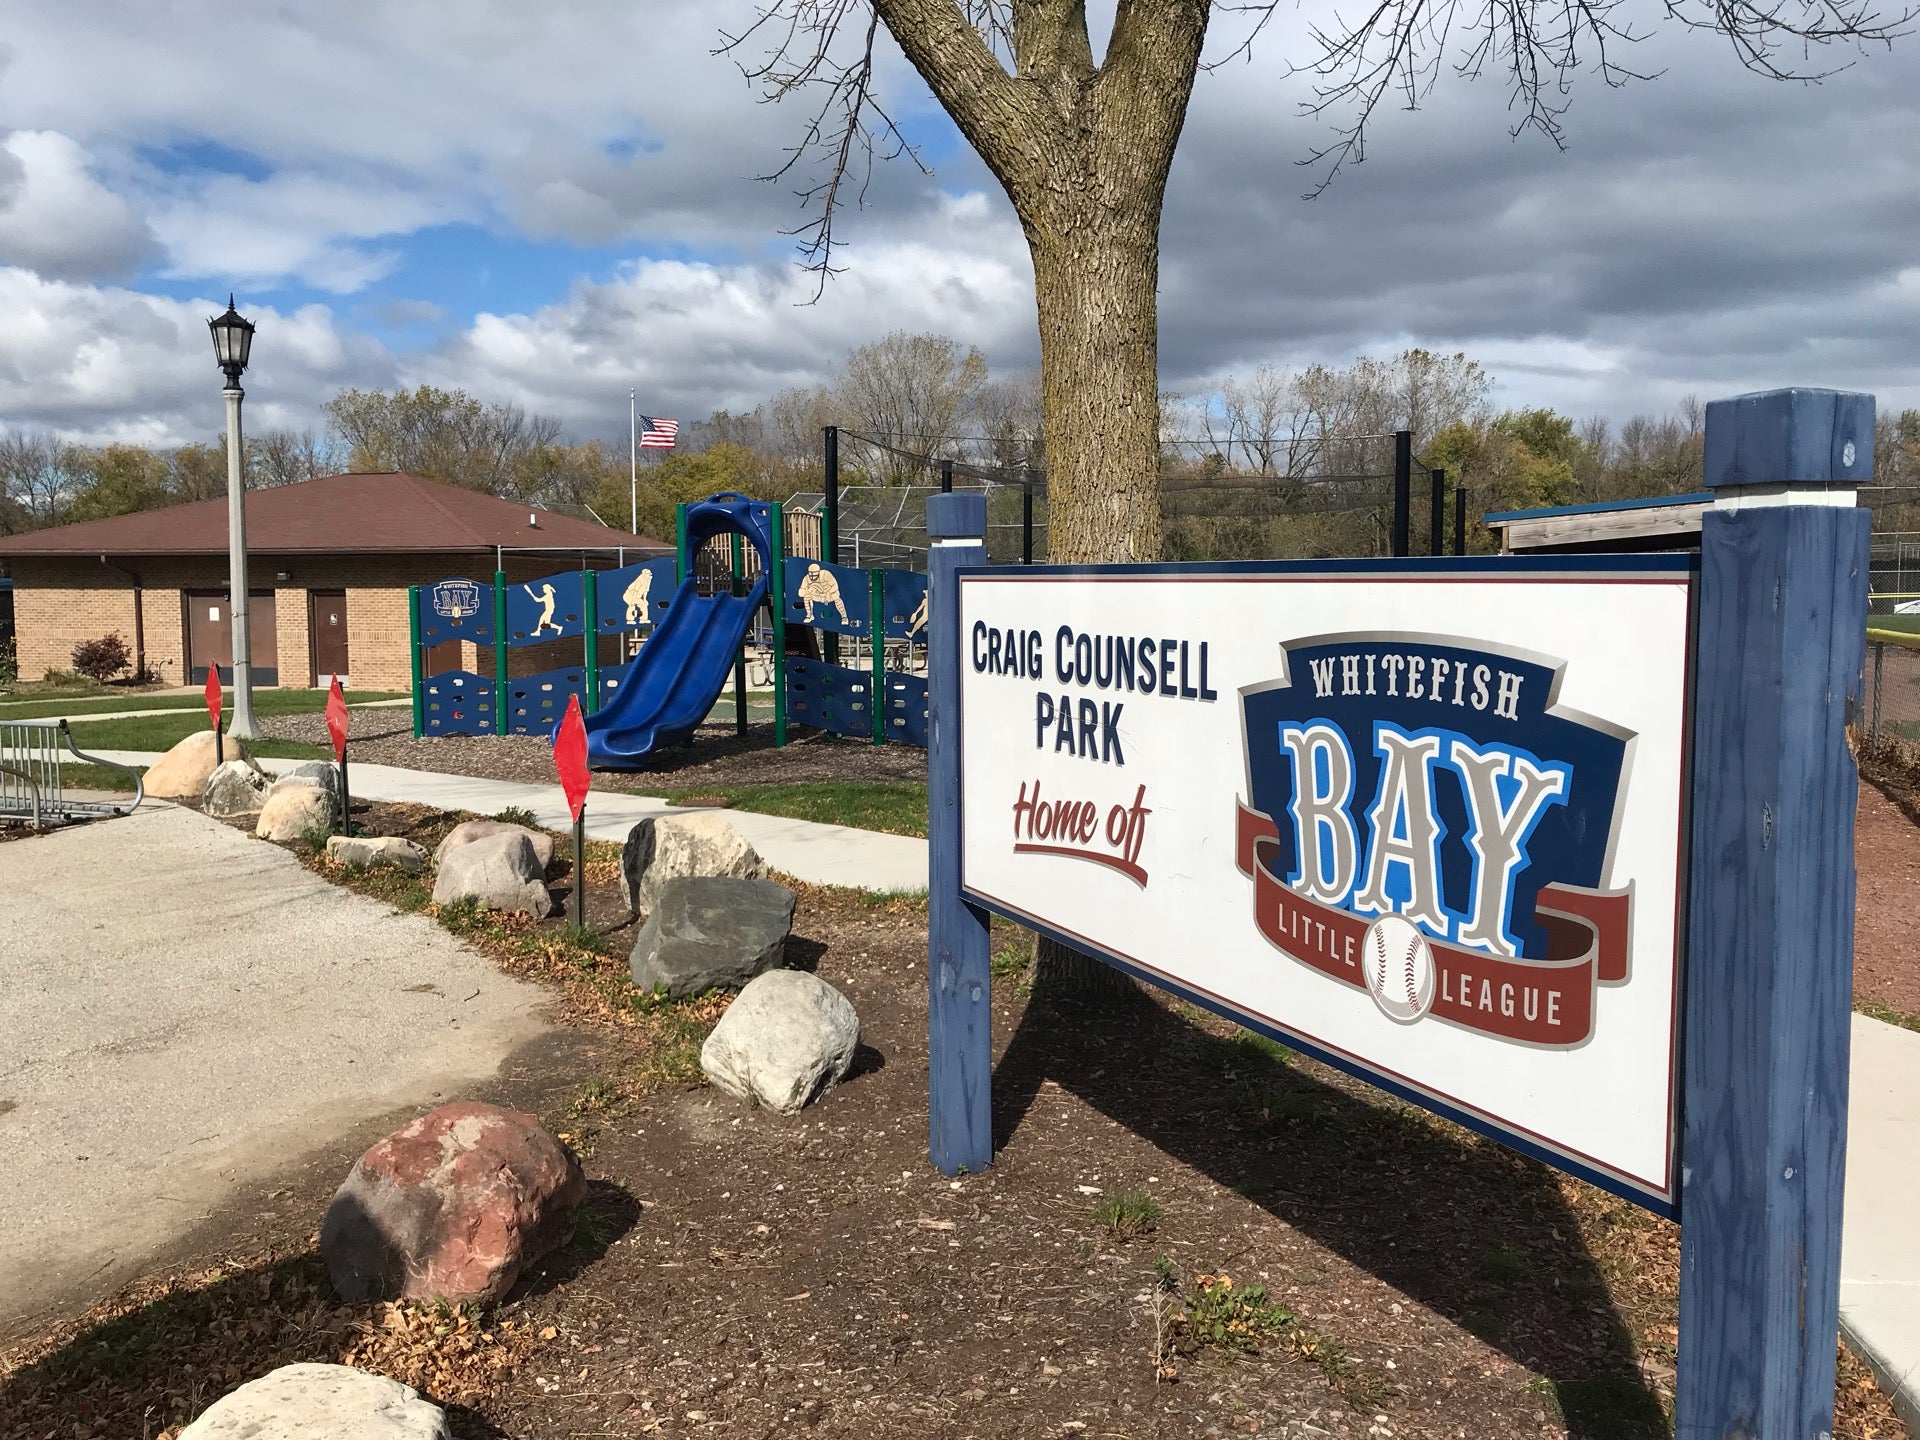 Craig Counsell Park Dedicated Today in Whitefish Bay